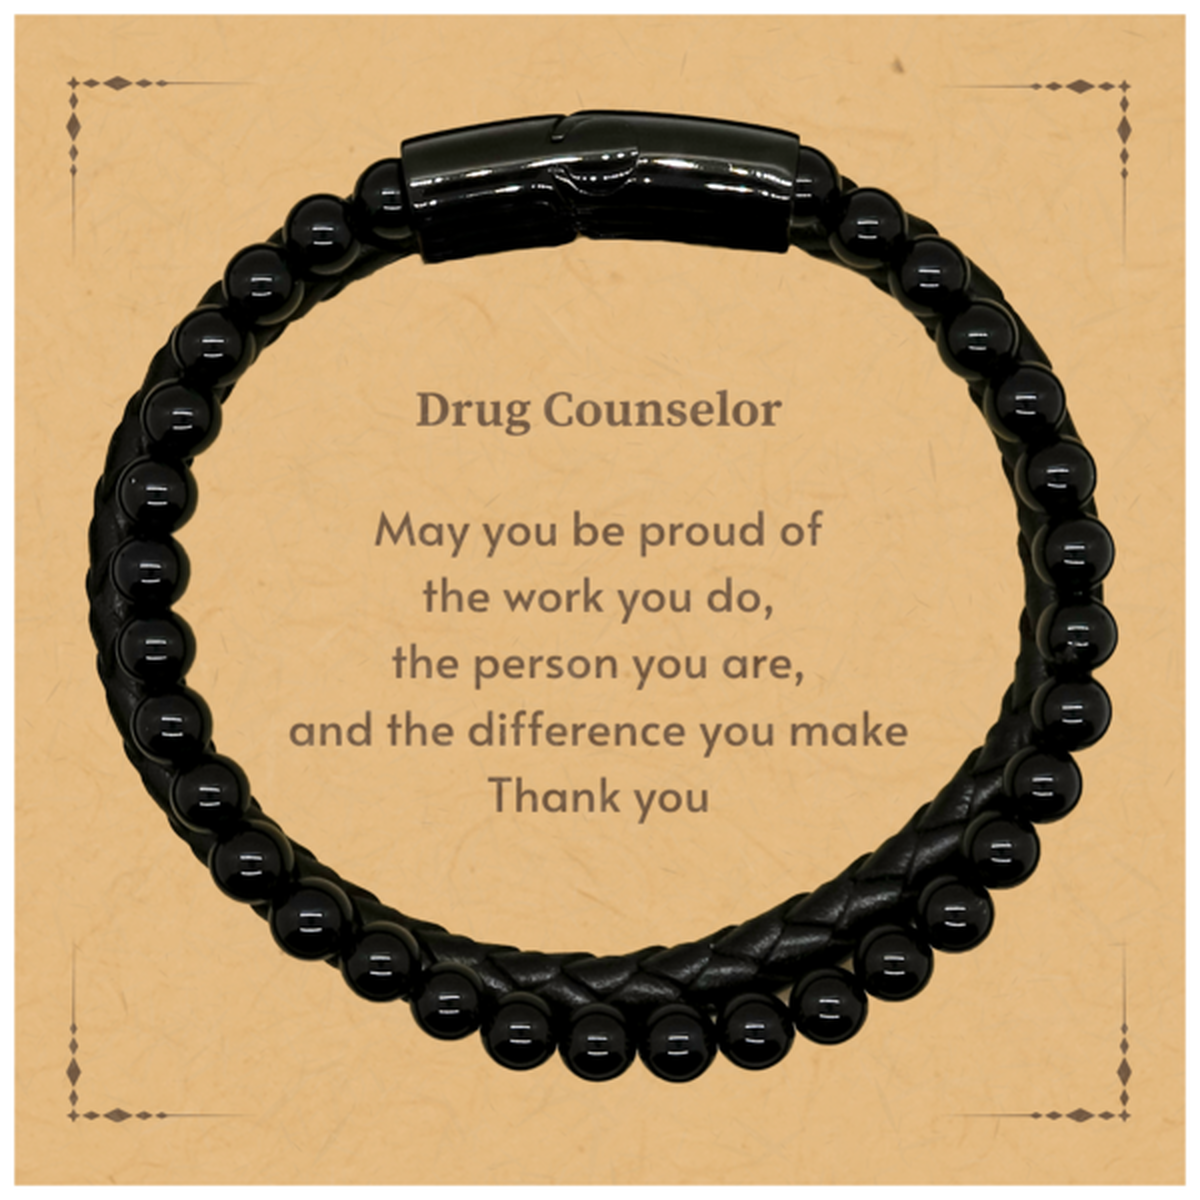 Heartwarming Stone Leather Bracelets Retirement Coworkers Gifts for Drug Counselor, Drug Counselor May You be proud of the work you do, the person you are Gifts for Boss Men Women Friends